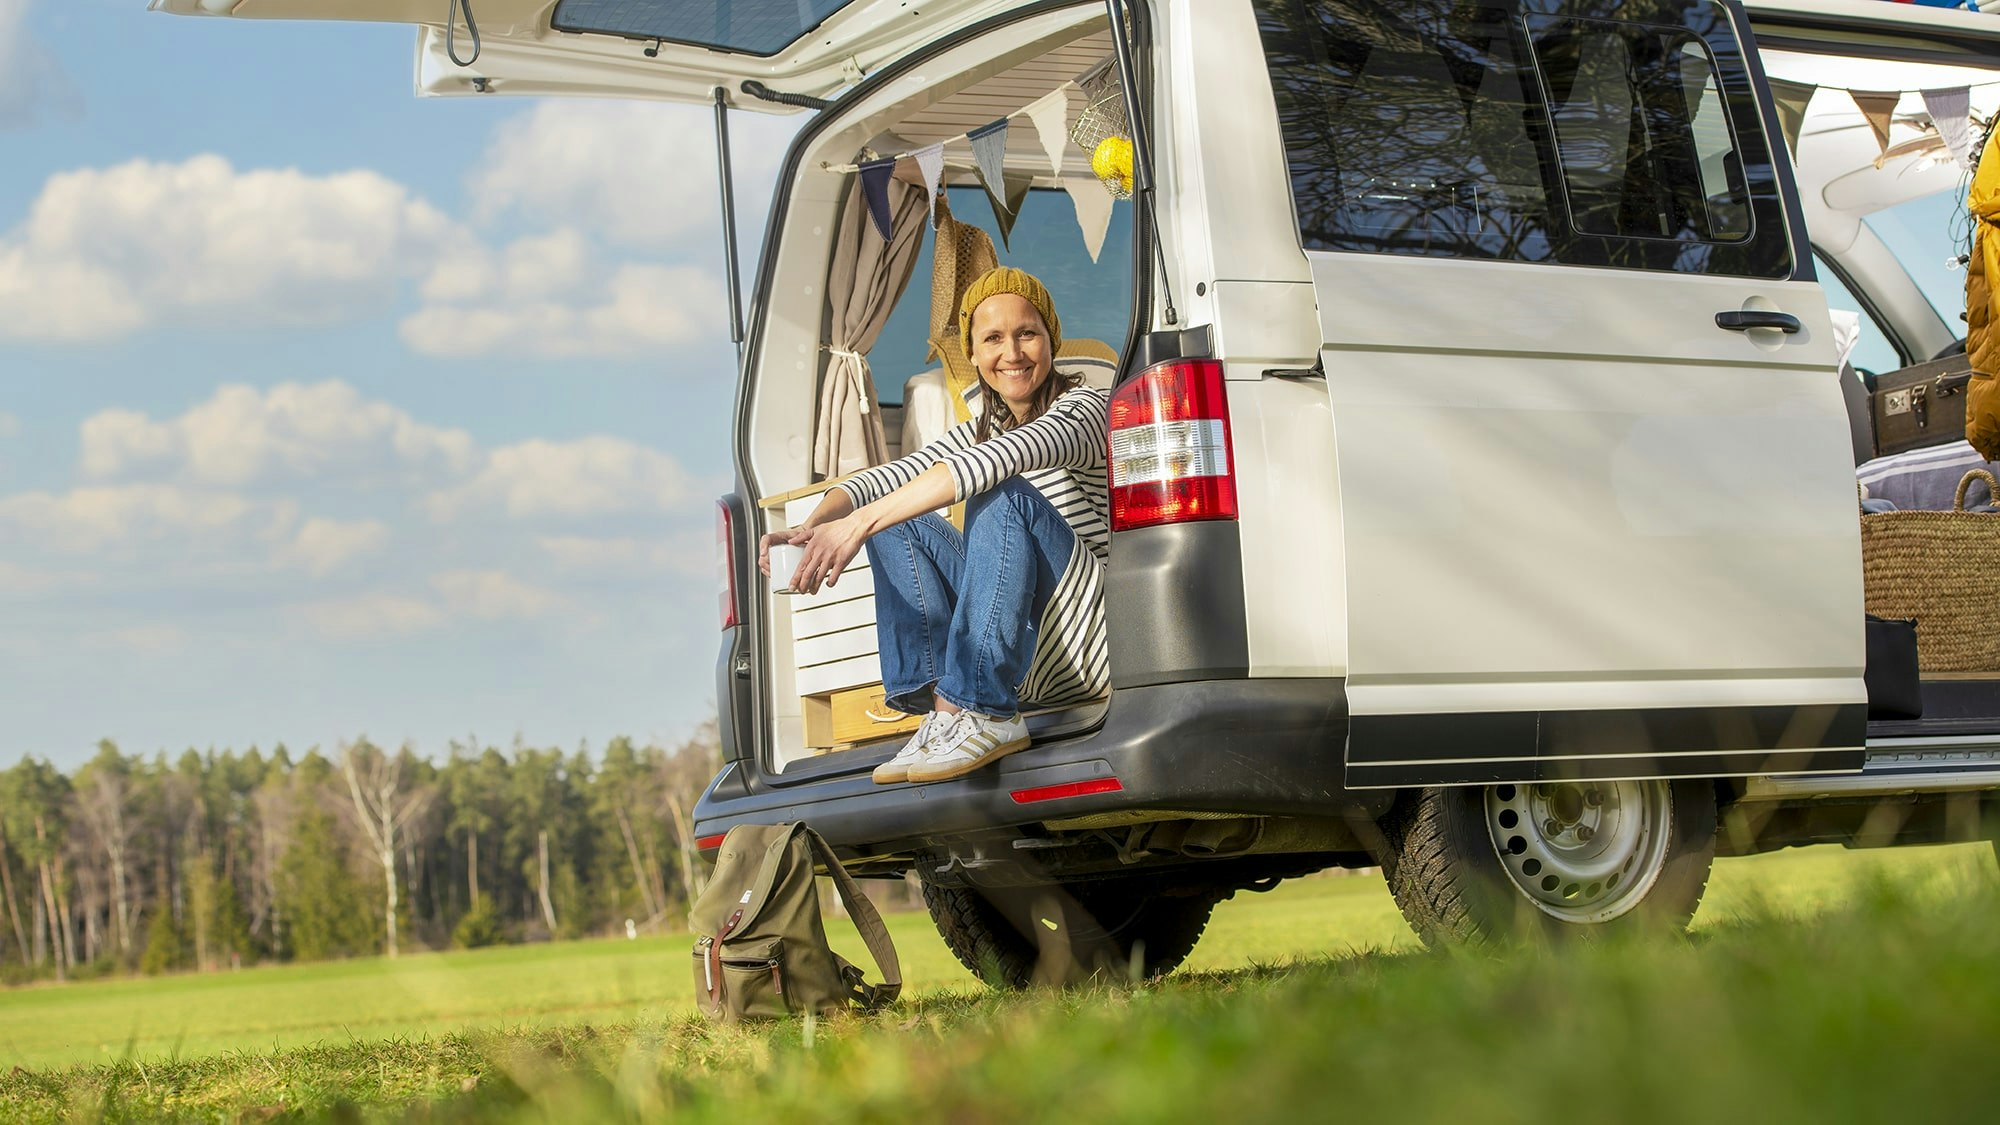 Woman with wool cap sitting outside in nature in camping bus with open back door.